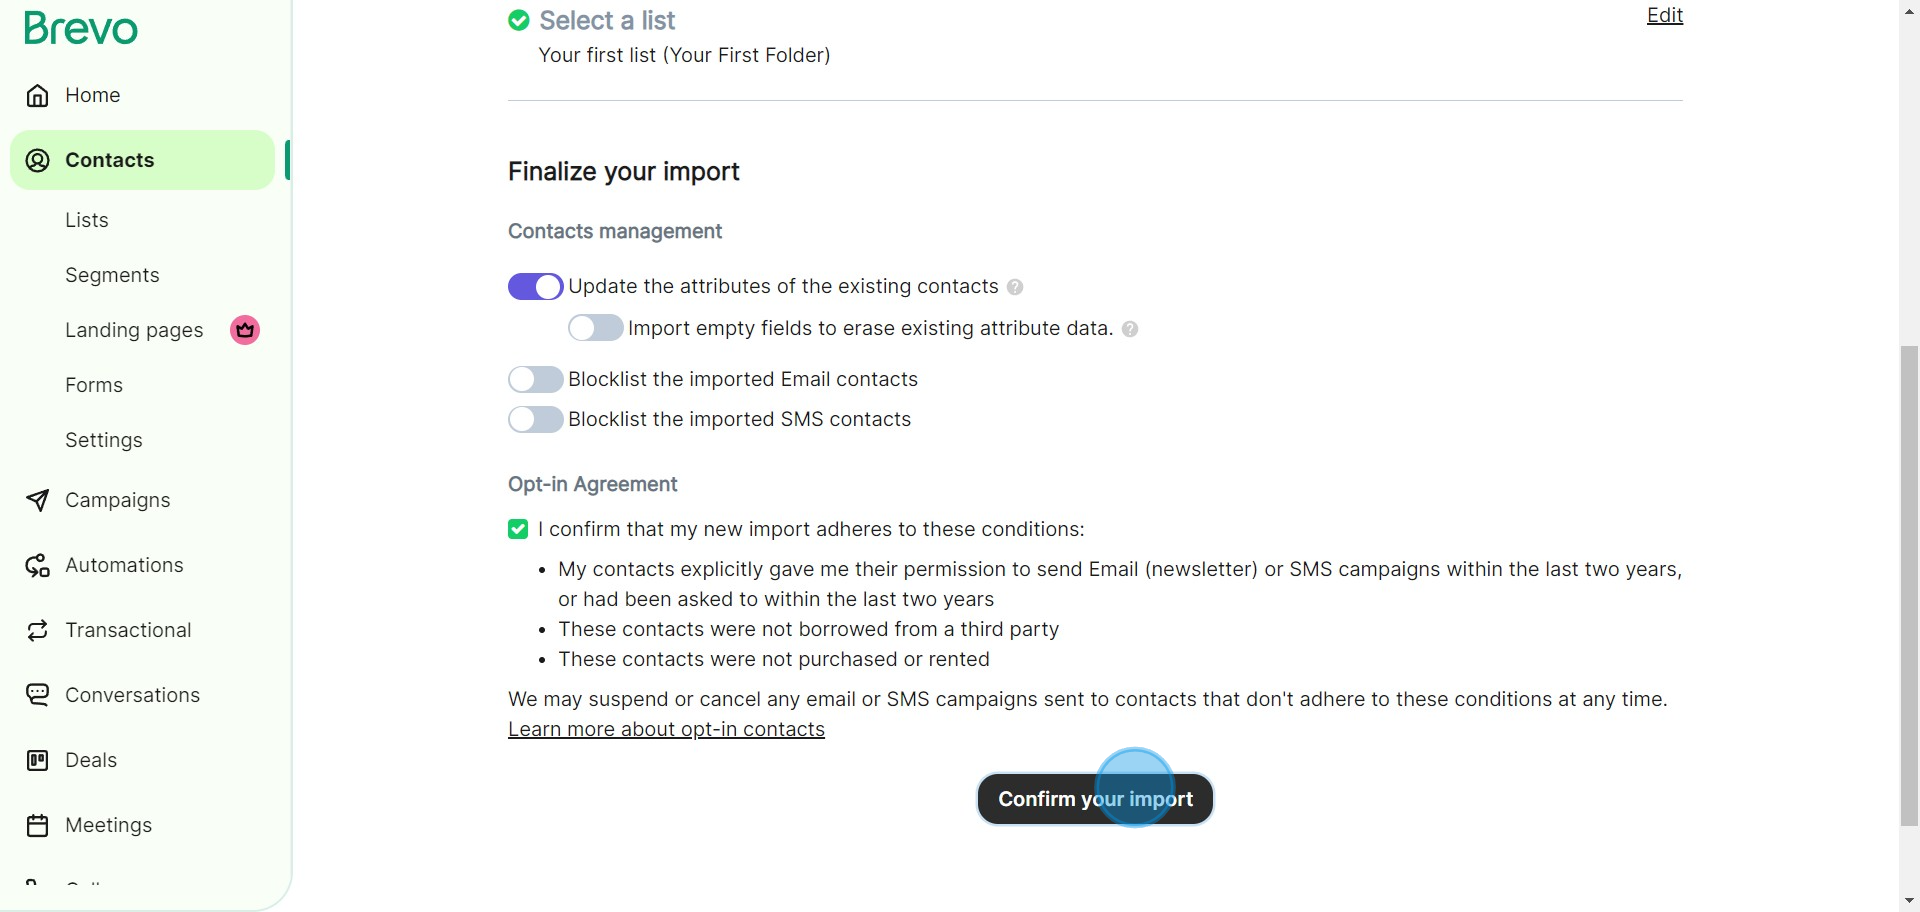 10 Click on "Confirm your import"